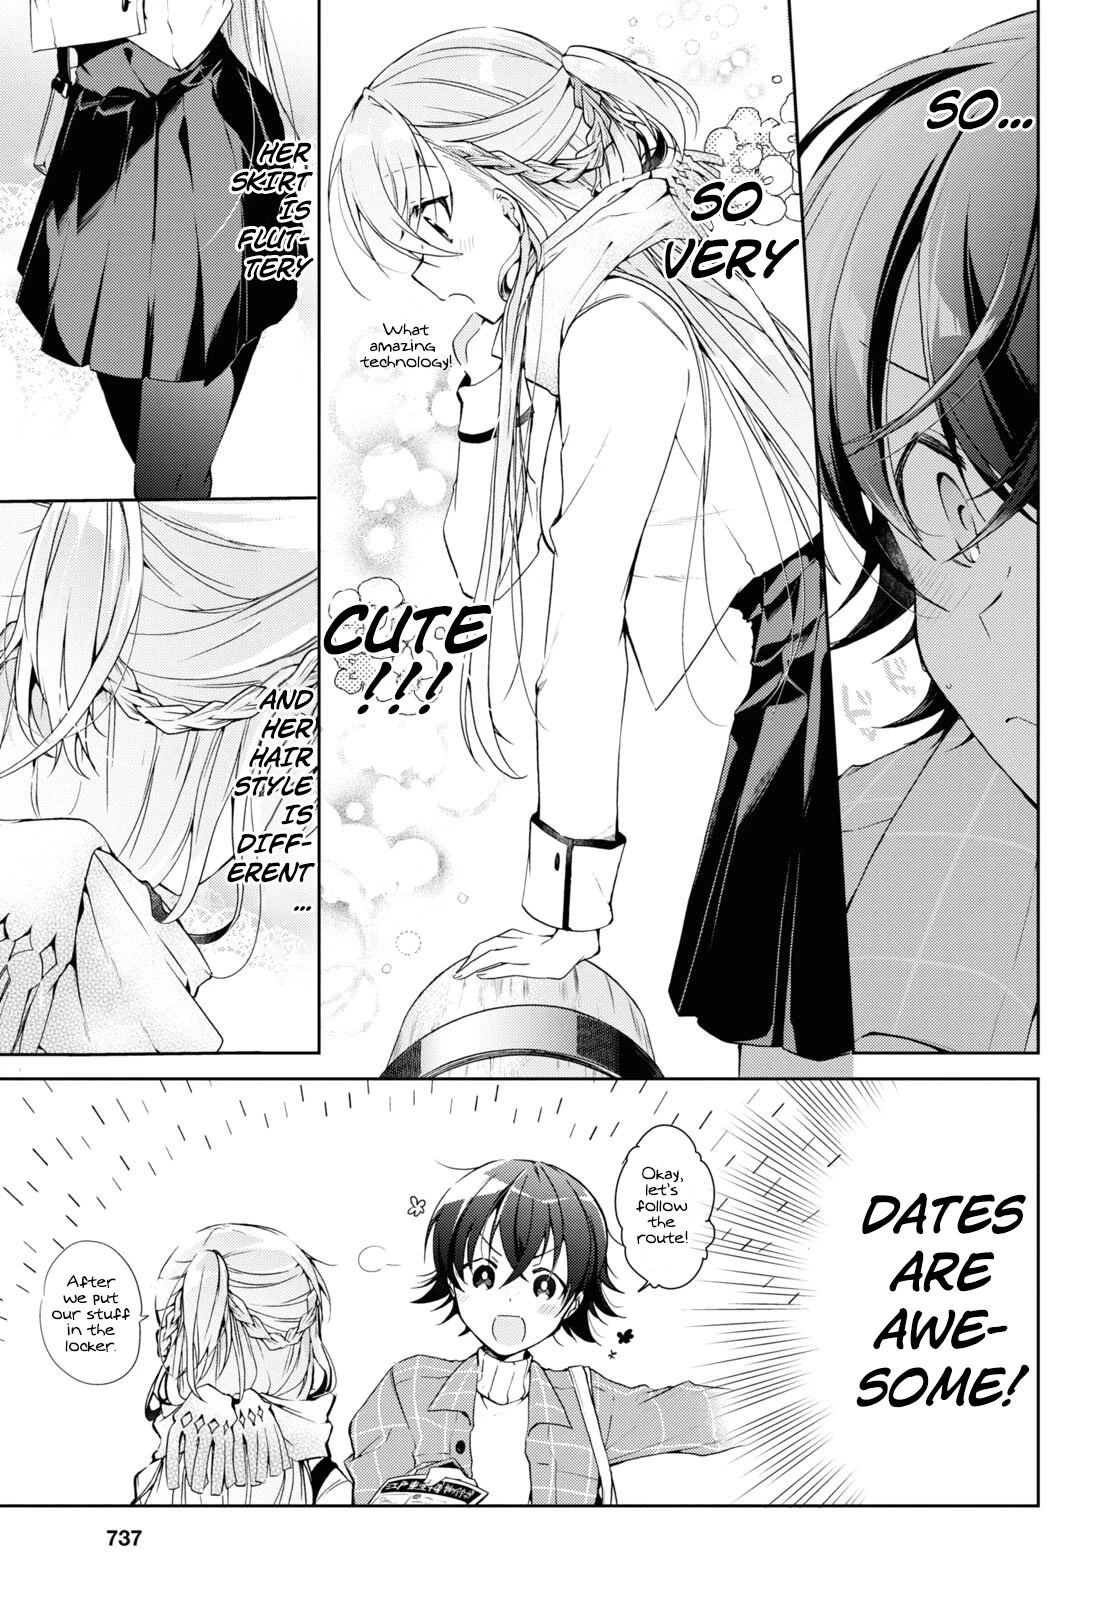 Isshiki-san Wants to Know About Love. - chapter 16 - #5